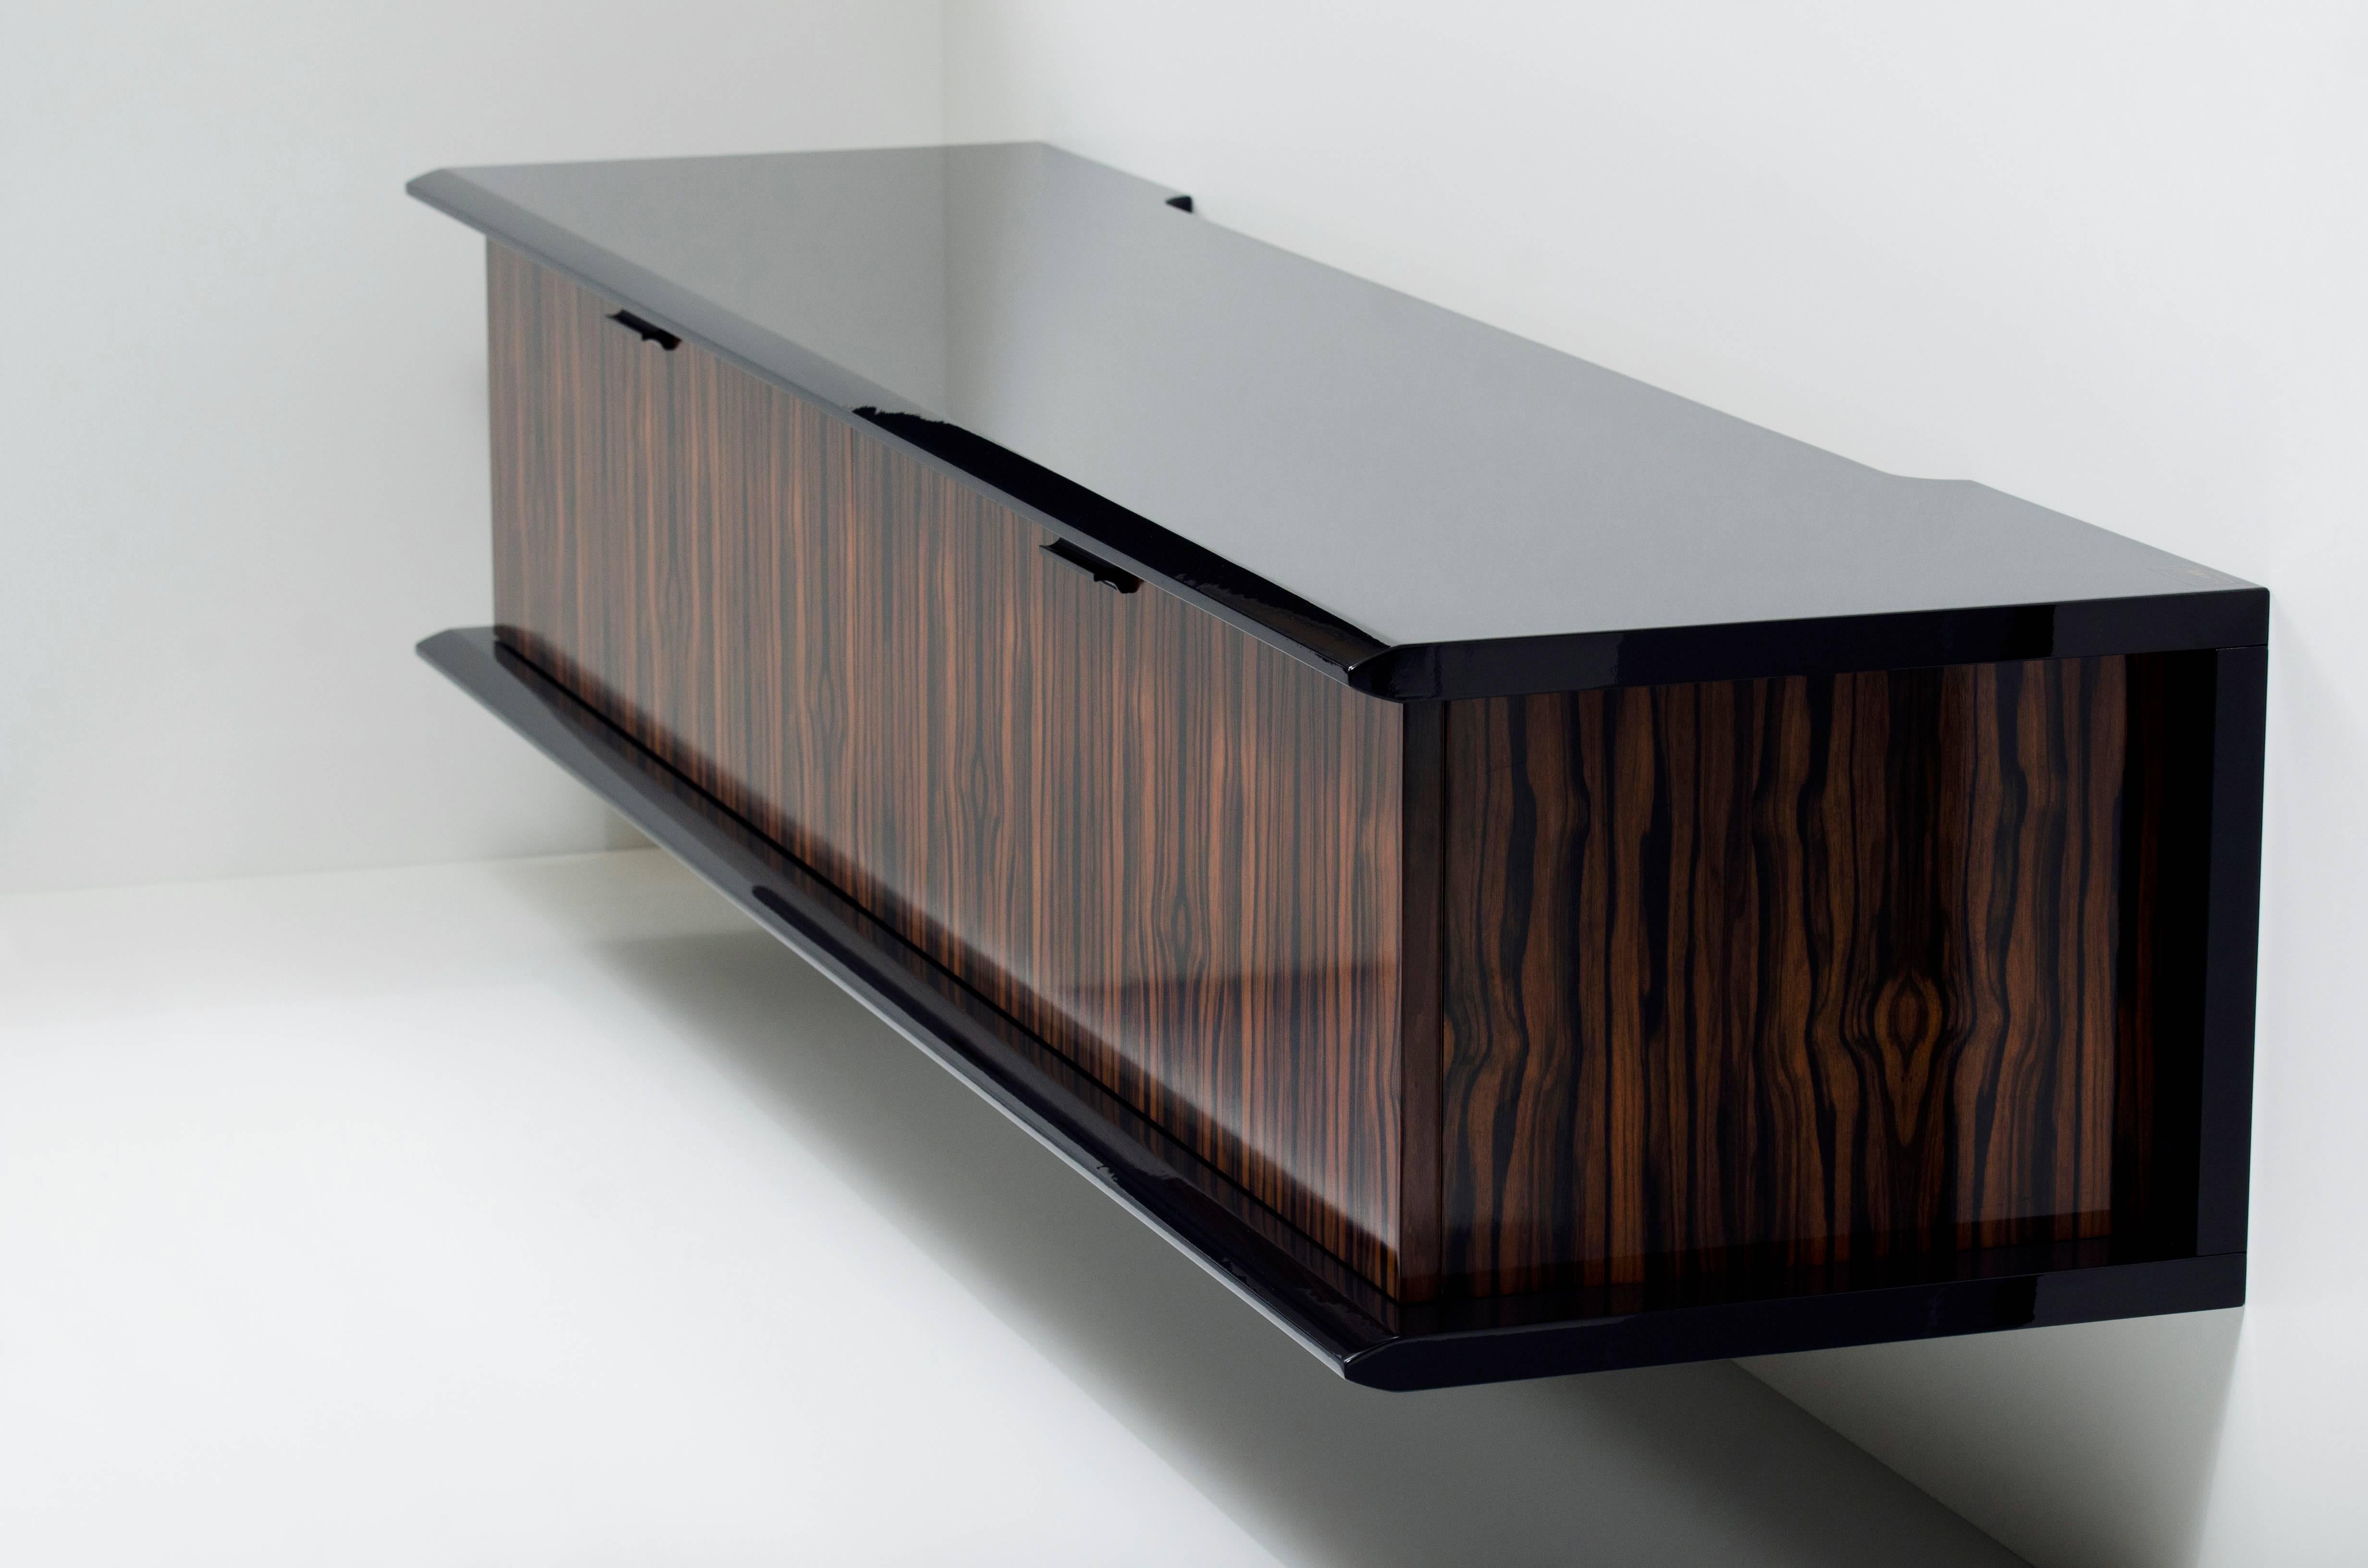 Shown in Macassar ebony and black lacquer, with Sycamore interior. The model one credenza by Pipim is customizable to any dimension and is available in a variety of woods, stains and lacquers. Multiple interior configurations are available. Each